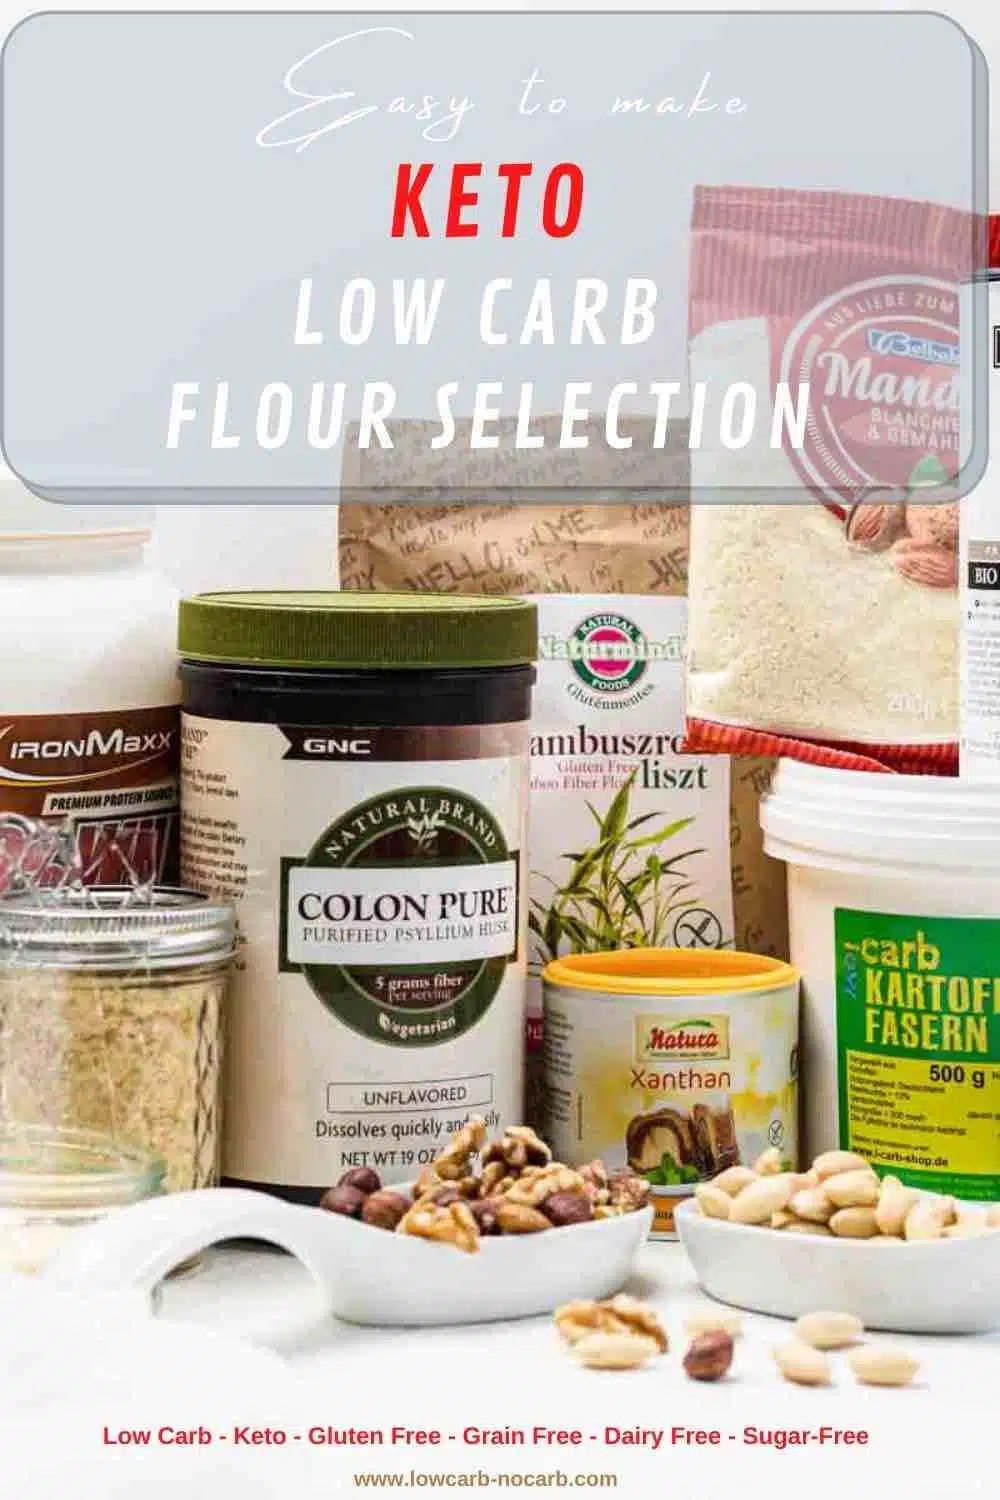 Keto Pantry Flour Selection Packaging